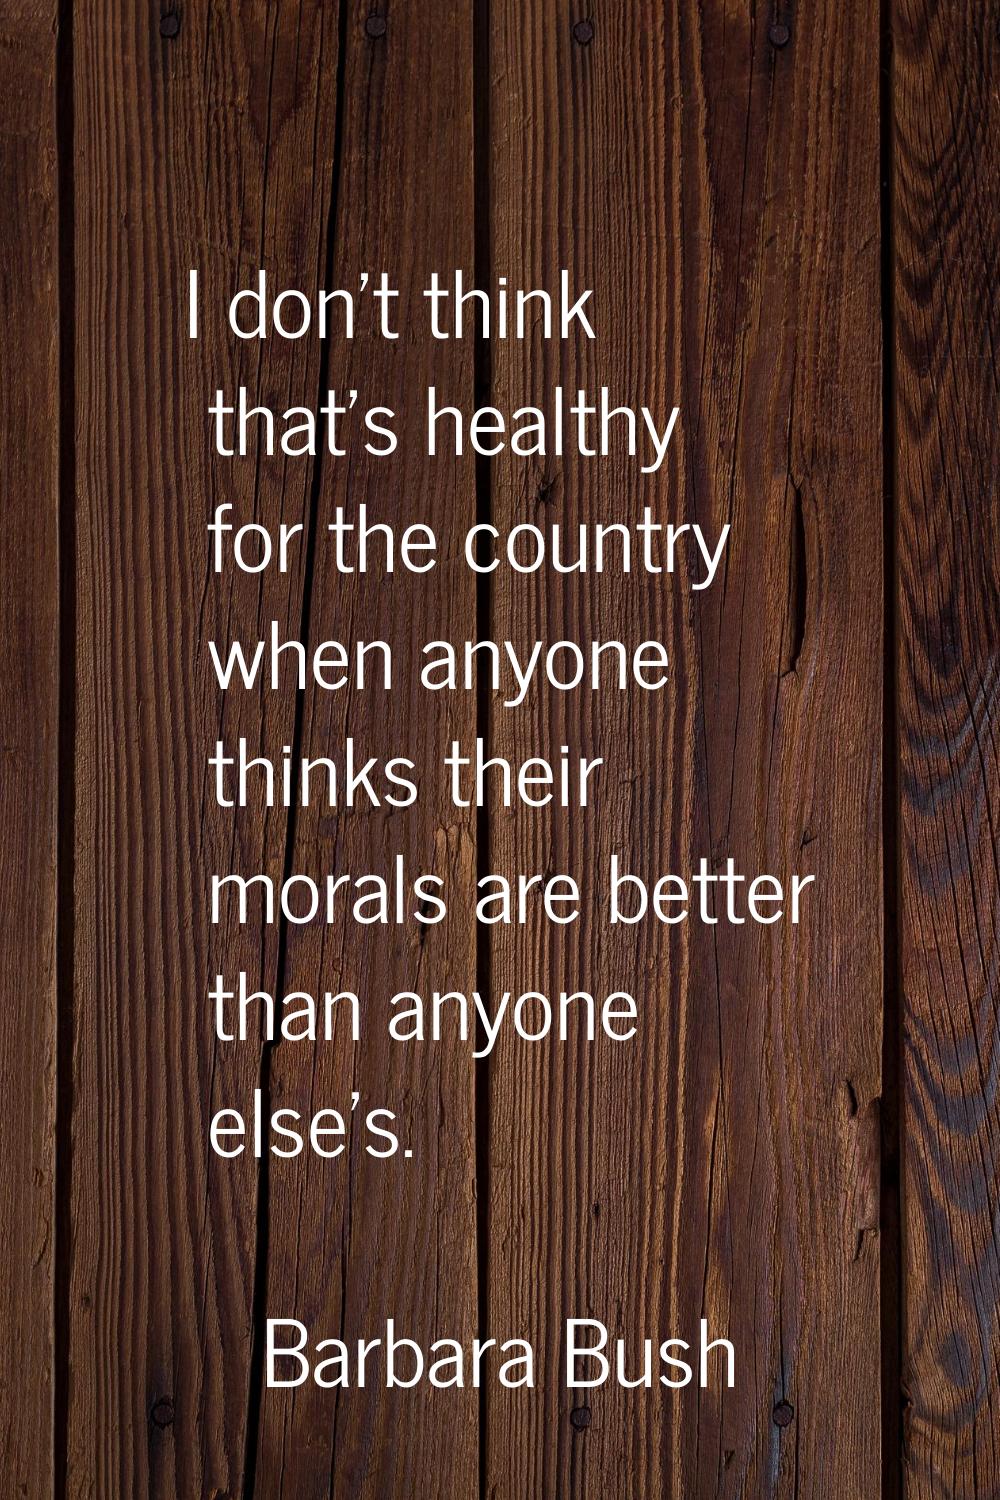 I don't think that's healthy for the country when anyone thinks their morals are better than anyone